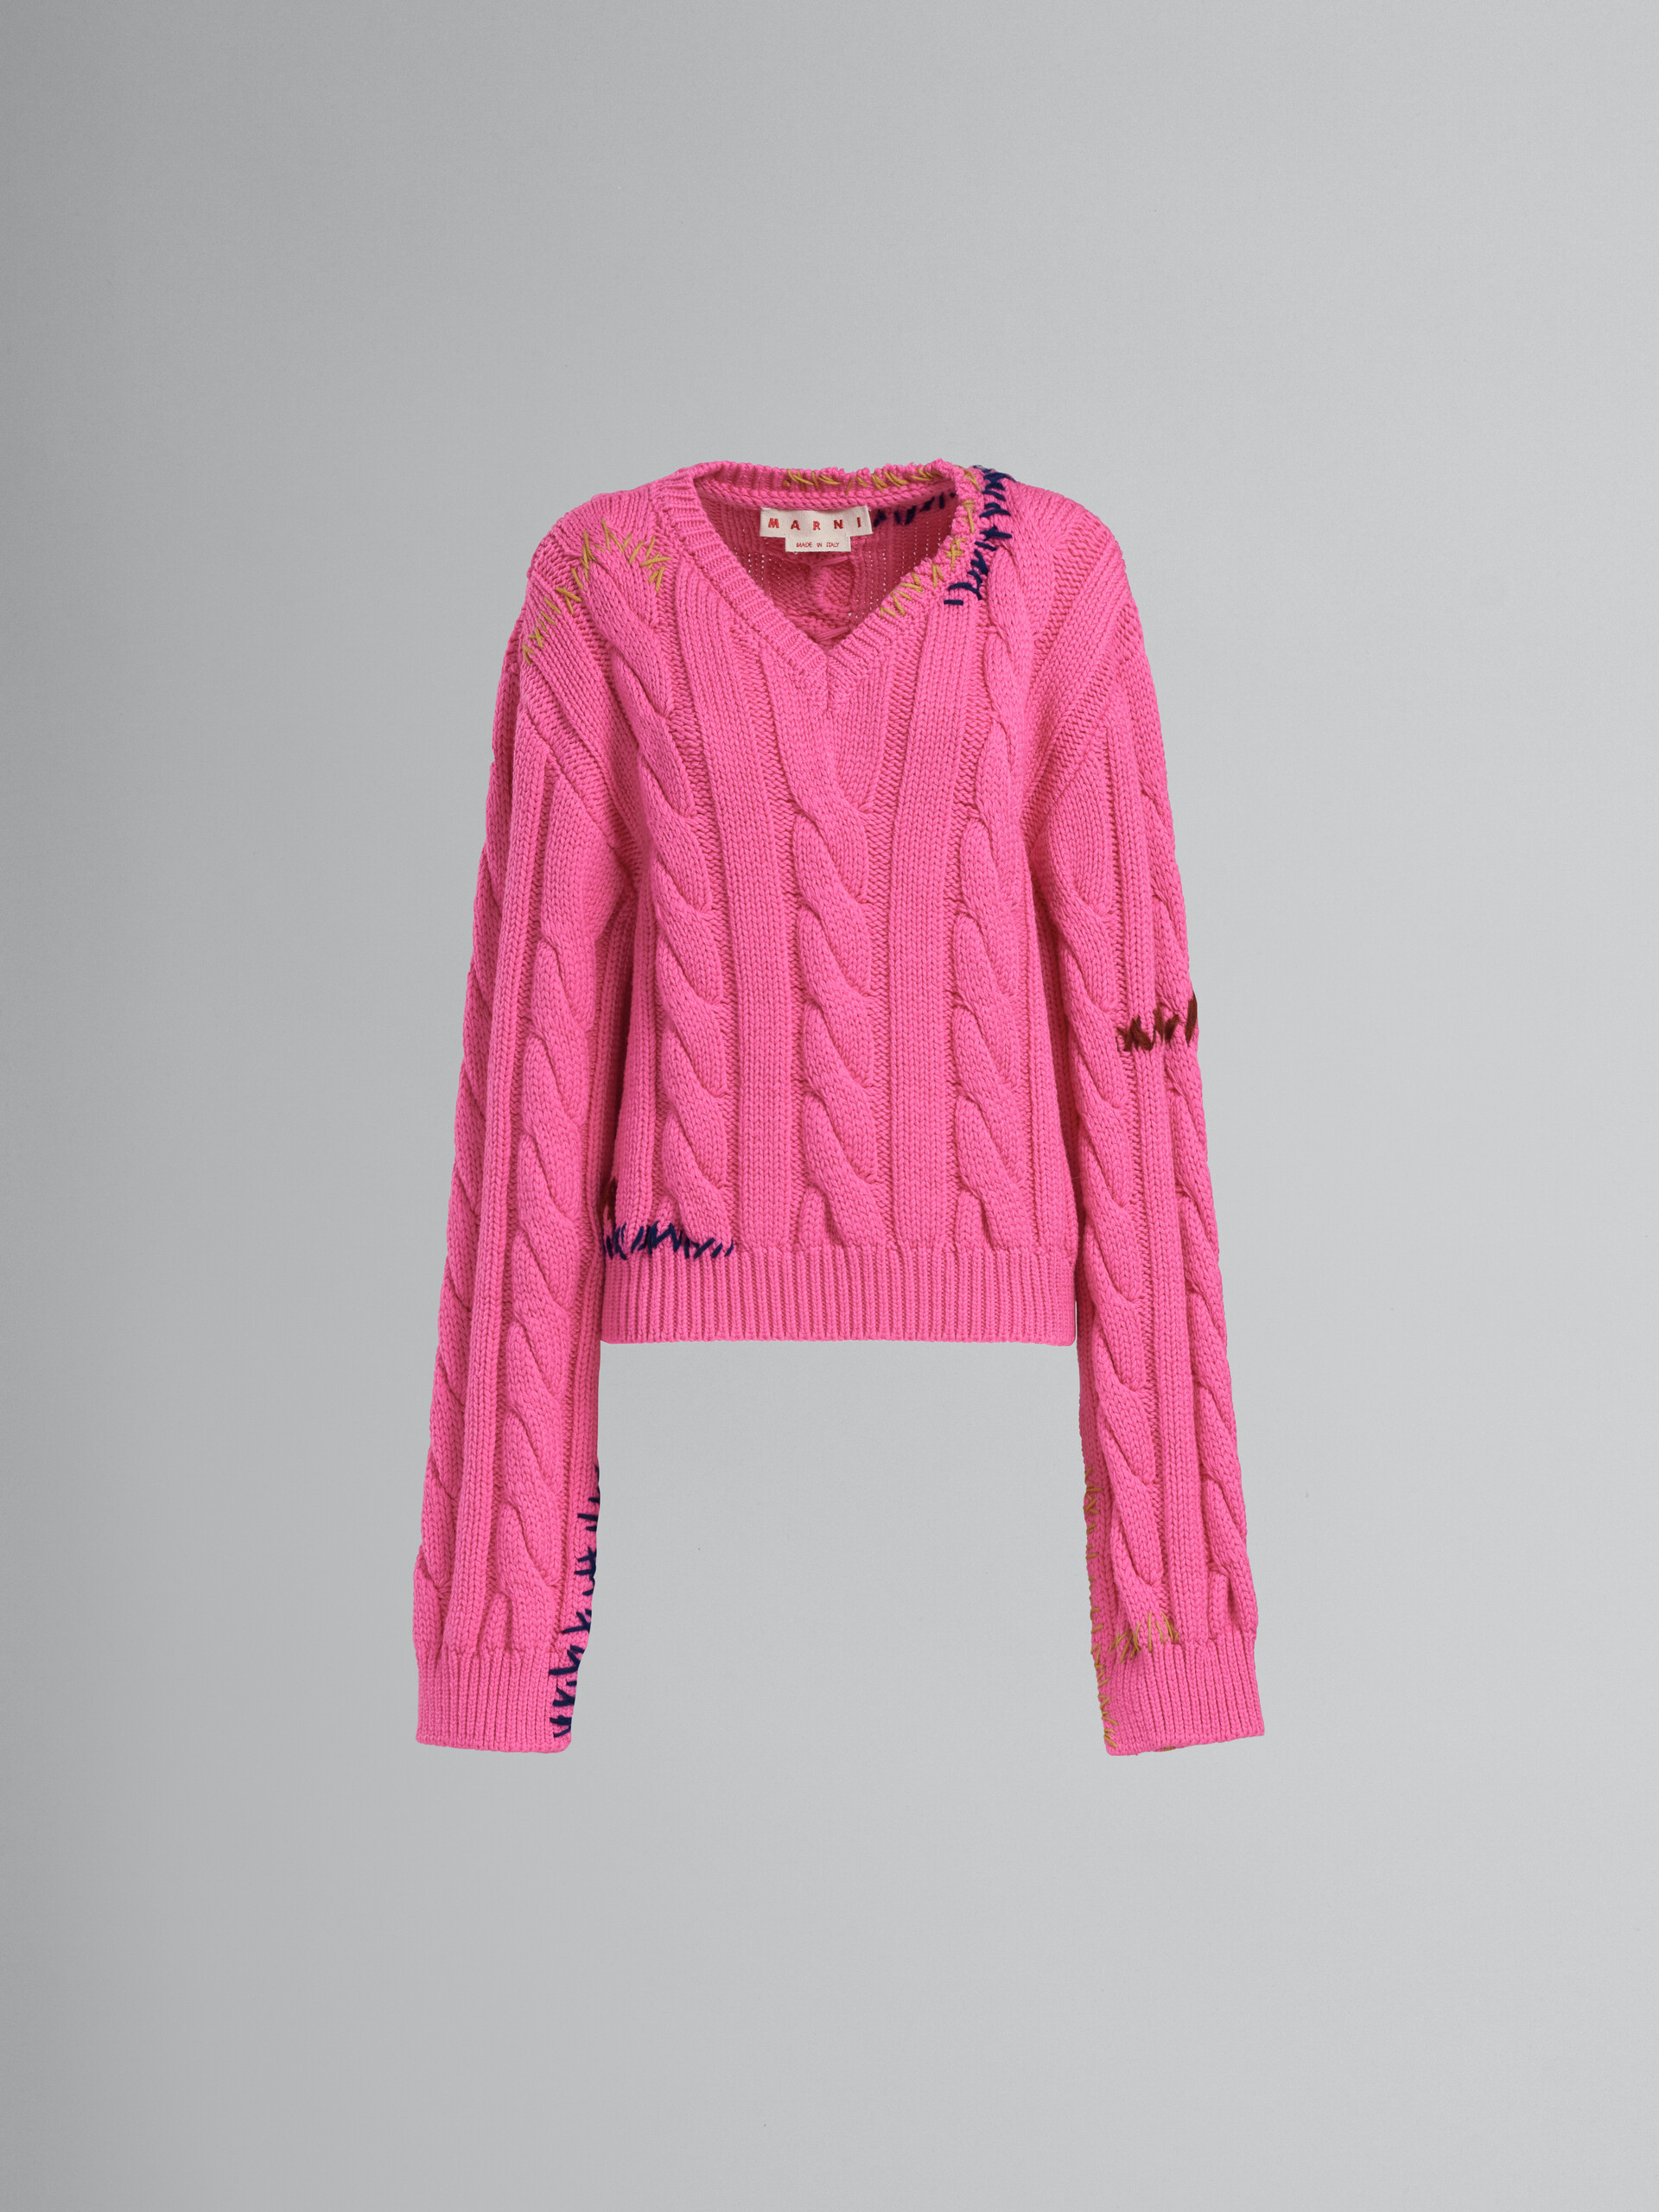 Fuchsia cable-knit sweater - Pullovers - Image 1